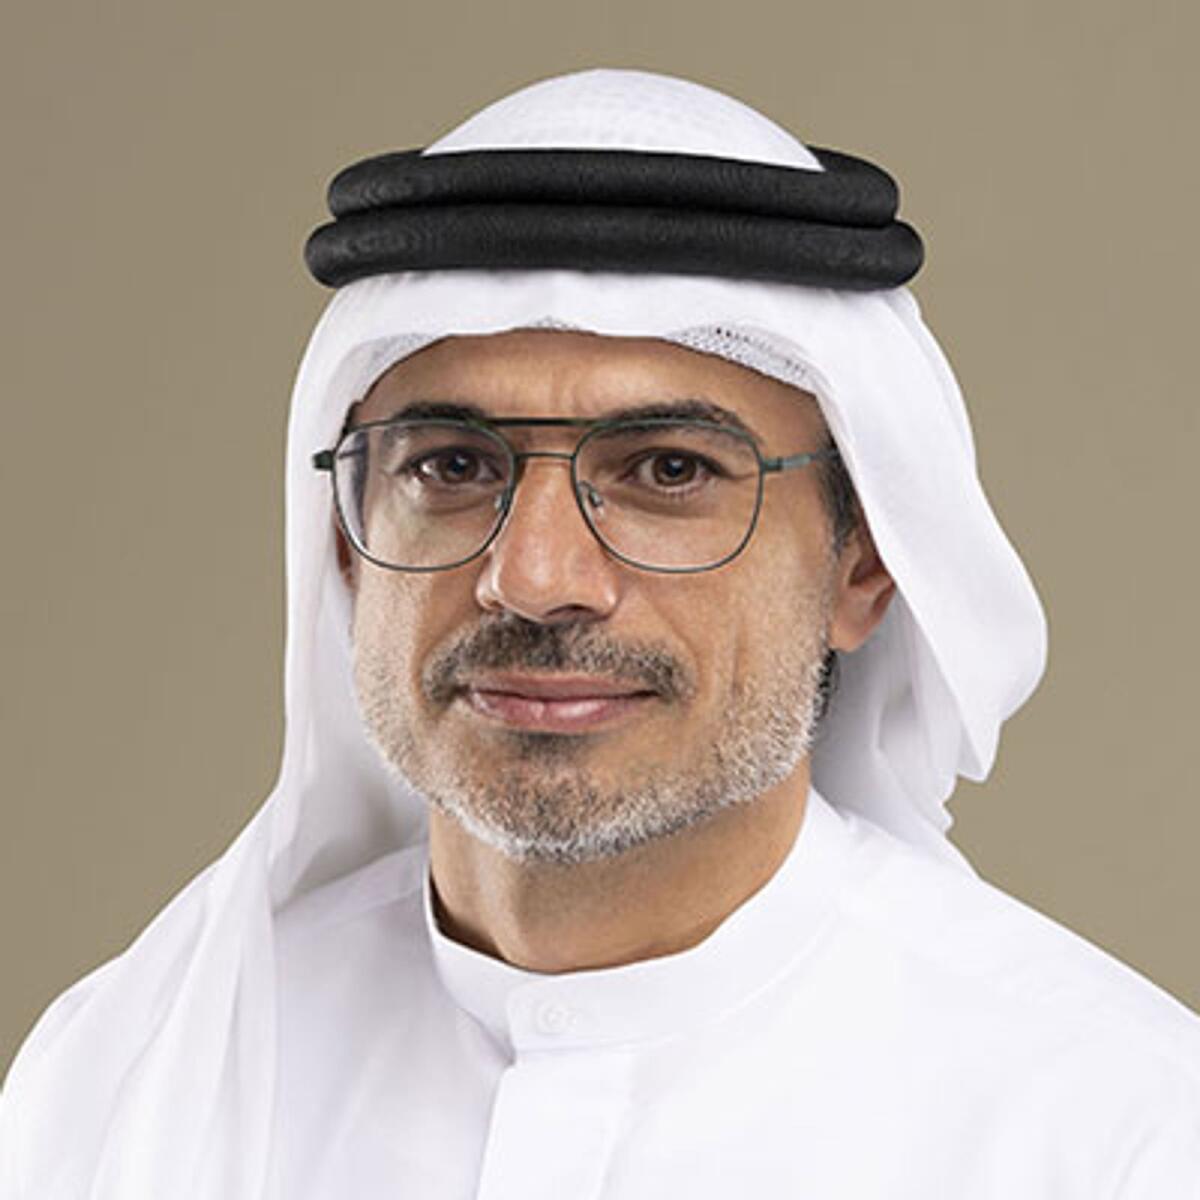 Hisham Khalid Malak, chairman of the Abu Dhabi Securities Exchange (ADX), said a $1.4 billion IPO fund launched by the emirate to attract companies to list is also helping the exchange to grow.